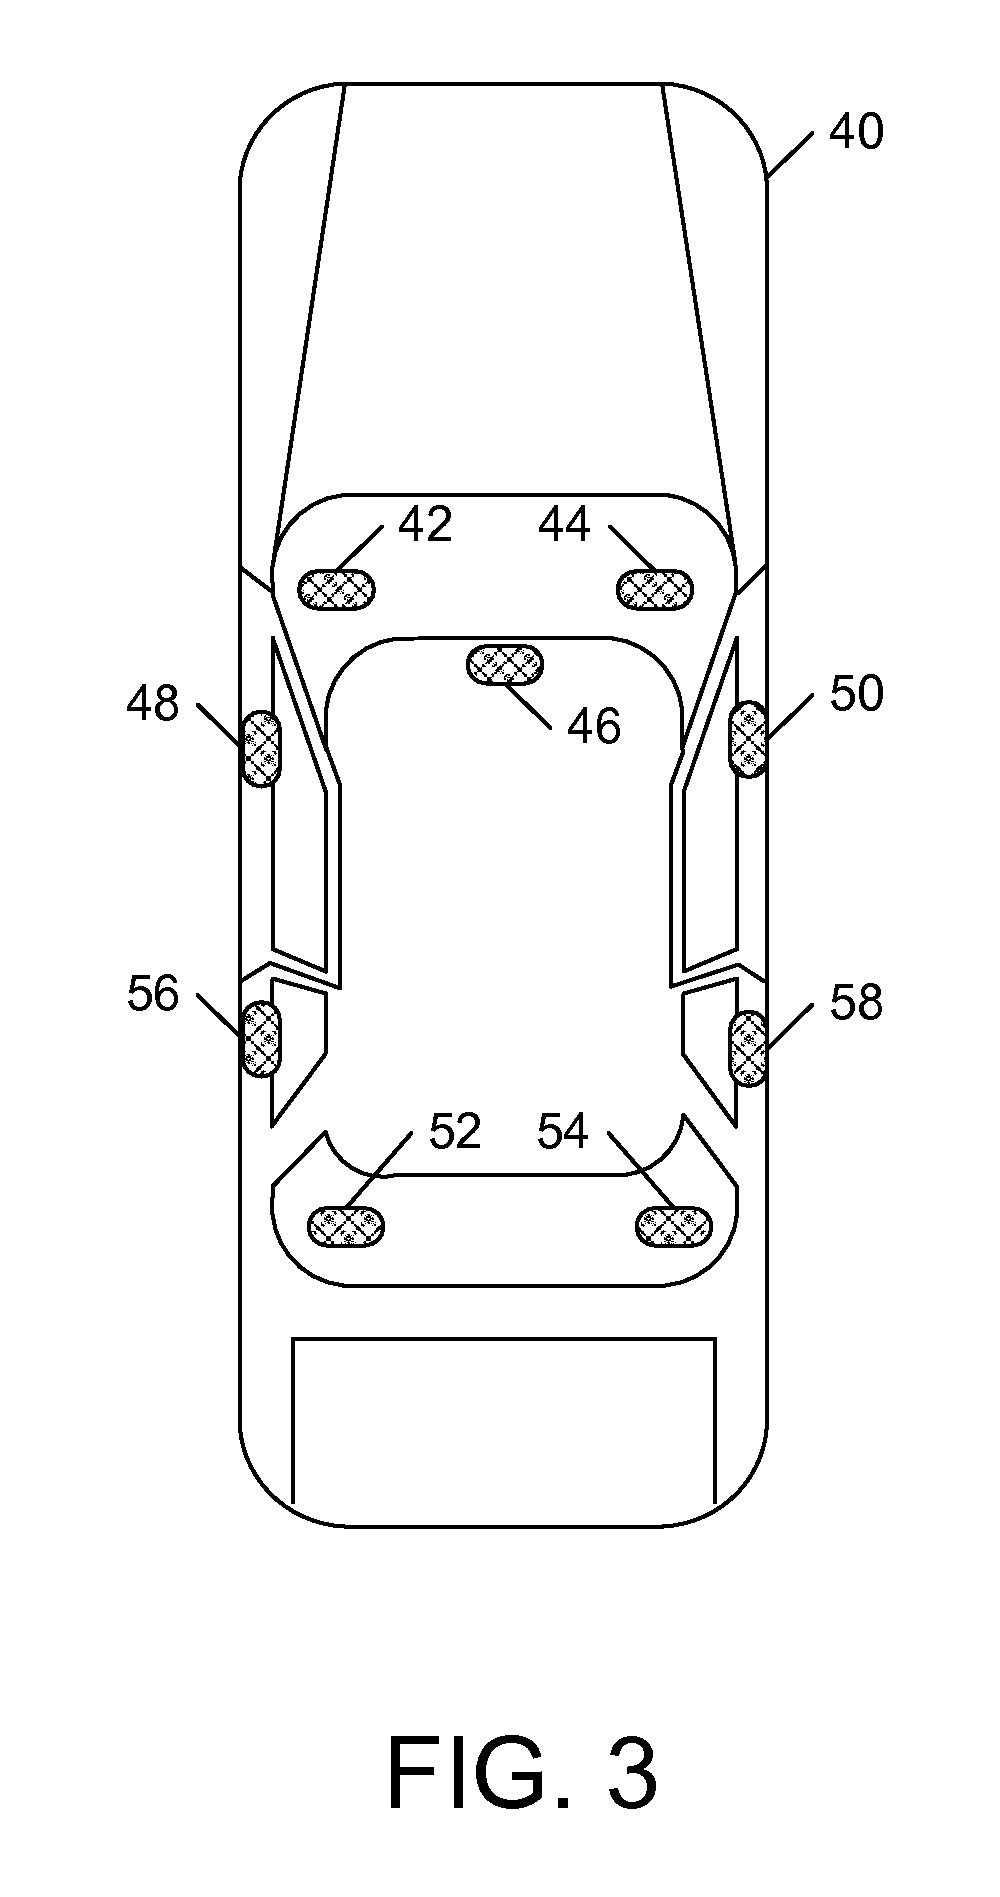 Positional Audio in a Vehicle-to-Vehicle Network